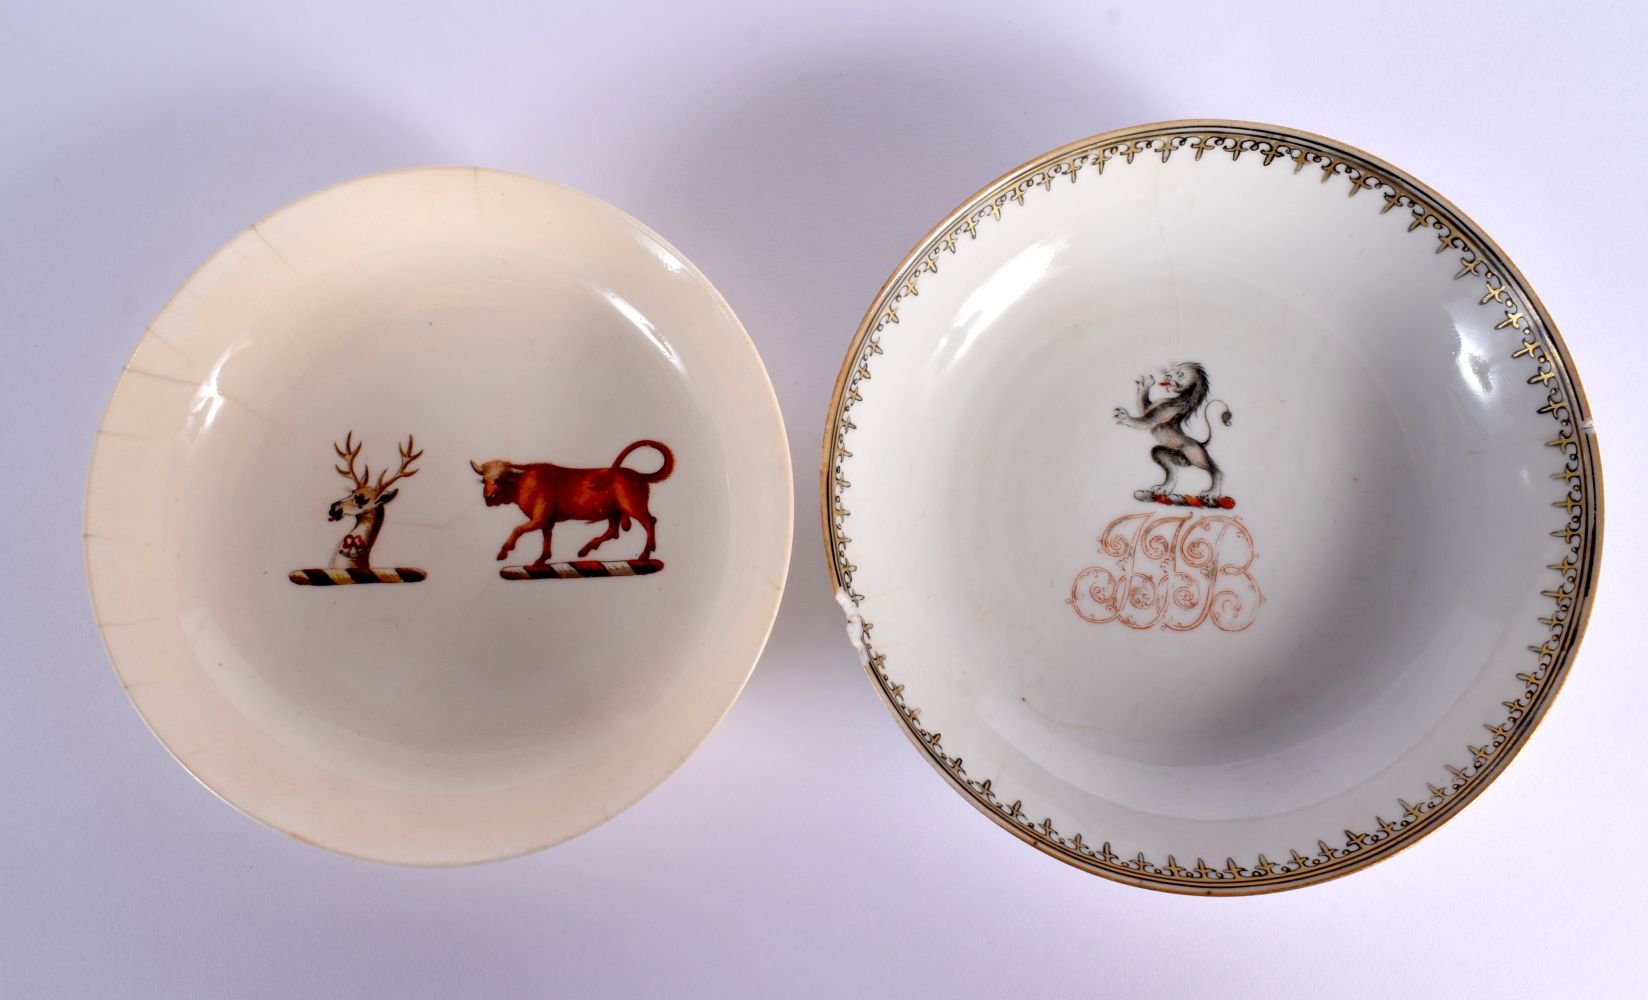 A RARE EARLY 19TH CENTURY DAVENPORT LONGPORT ARMORIAL SAUCER and a Chinese Qianlong saucer. Largest